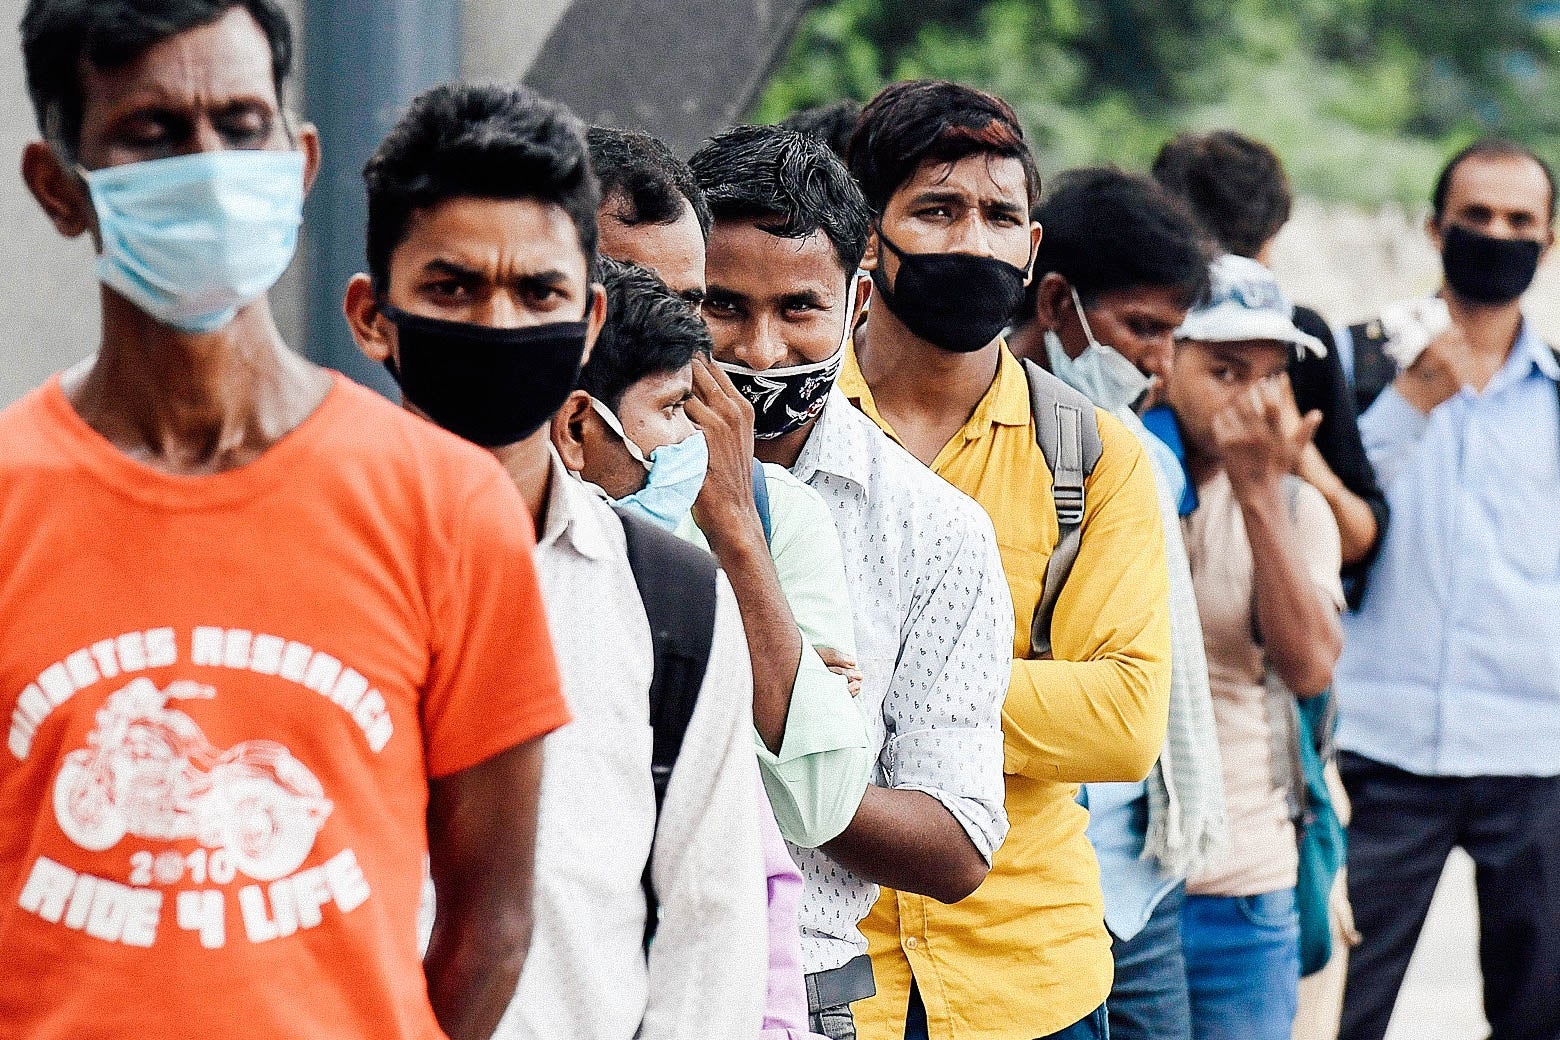 Men wearing masks stand in a queue.